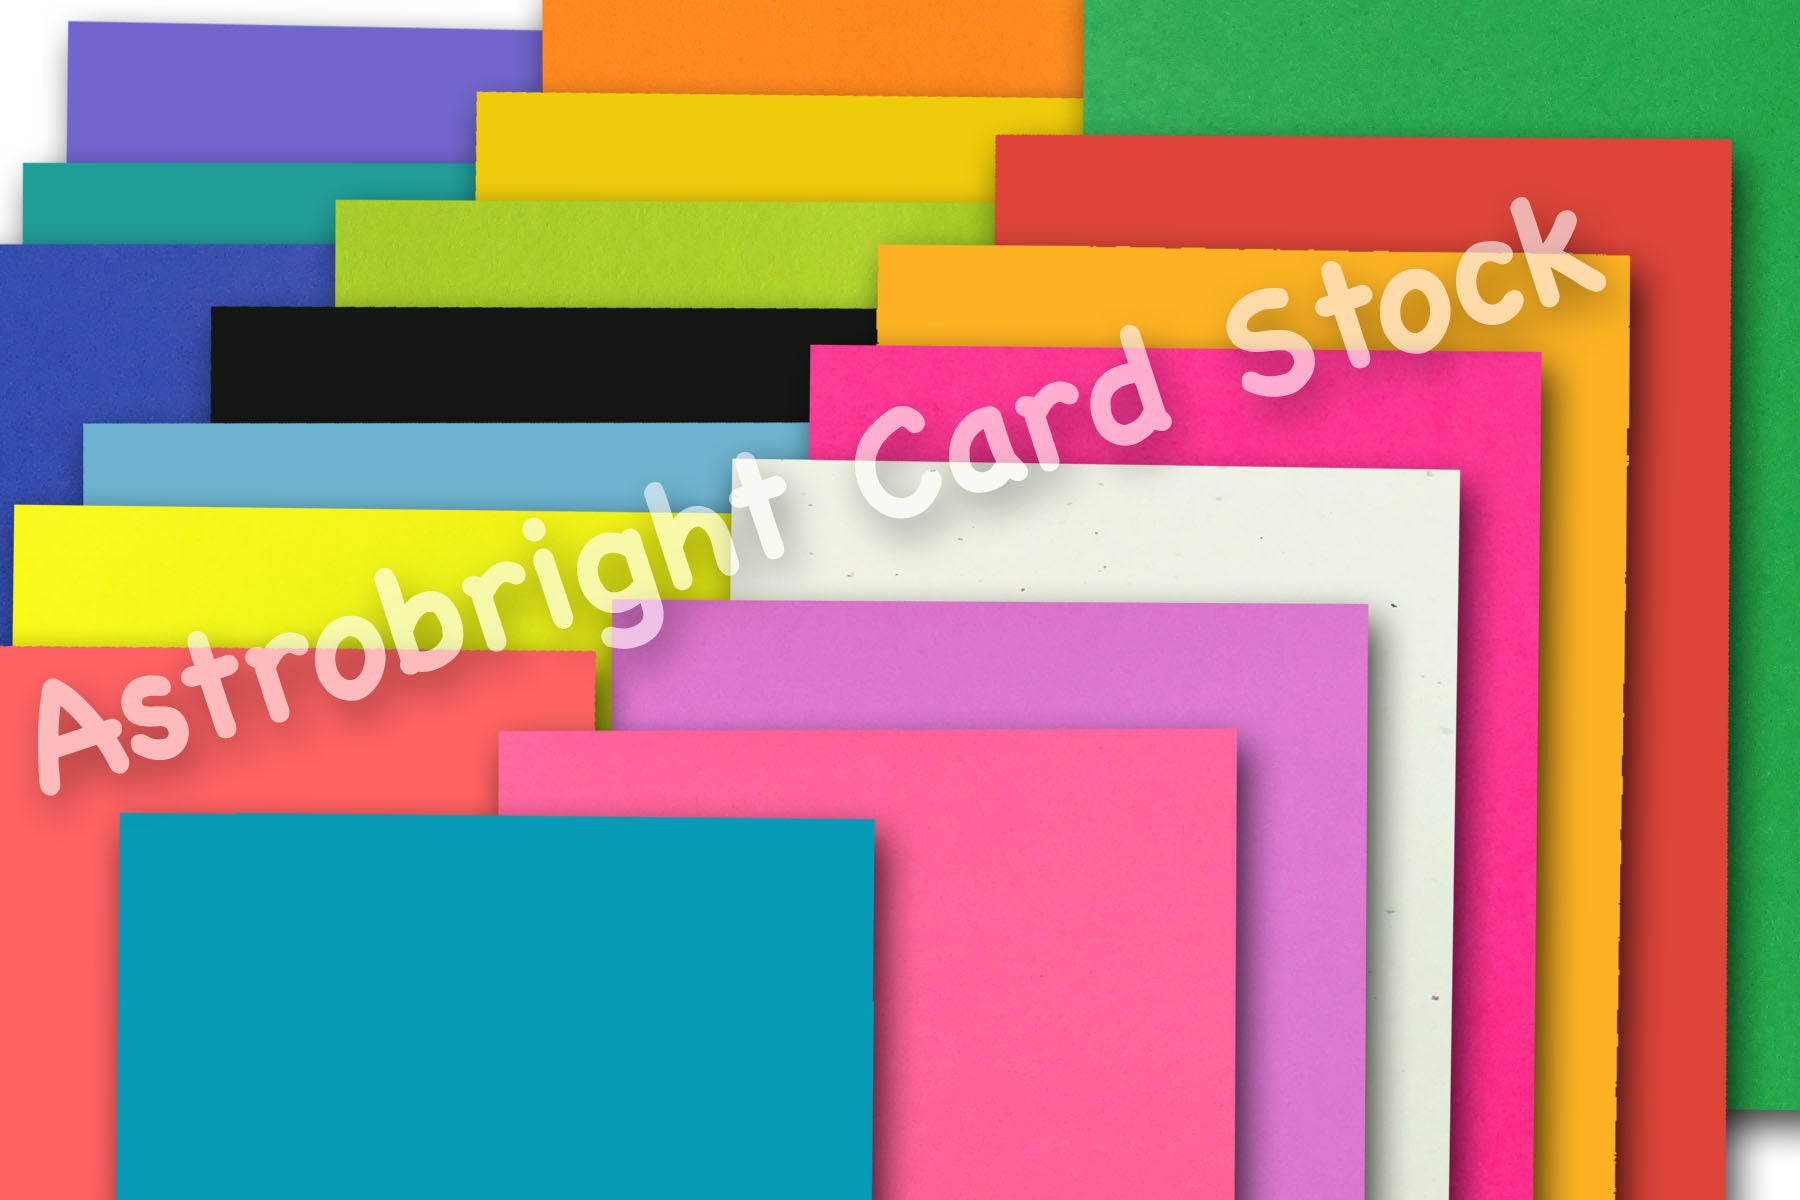 Astrobright Terrestrial Teal 65# Cardstock – The Paper Store and More